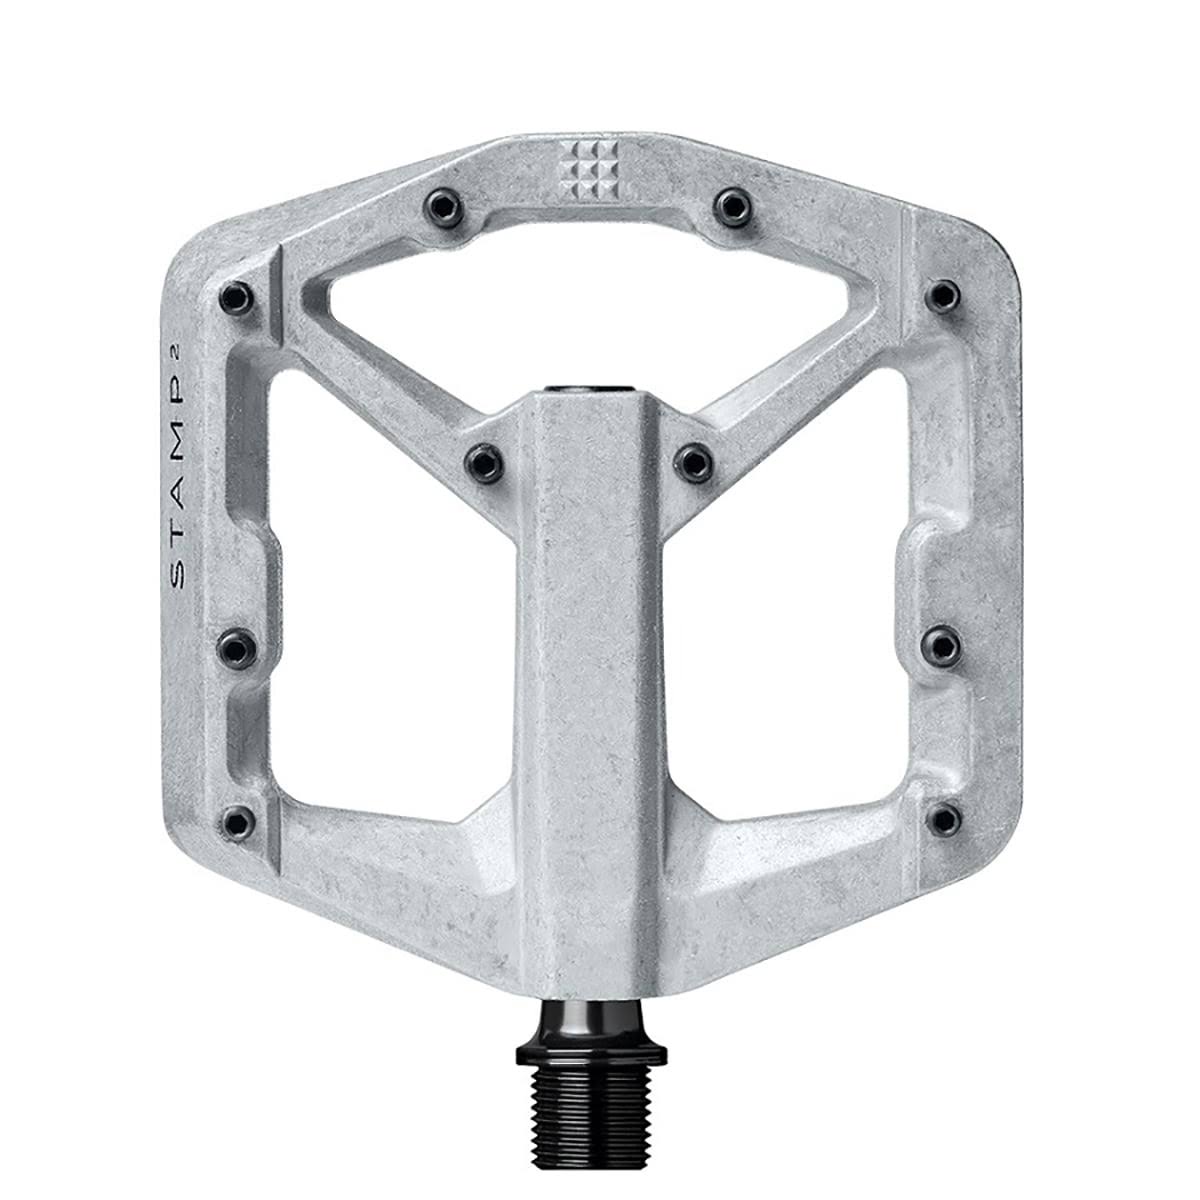 Crank Brothers Stamp 2 Large Pedals, Raw Silver